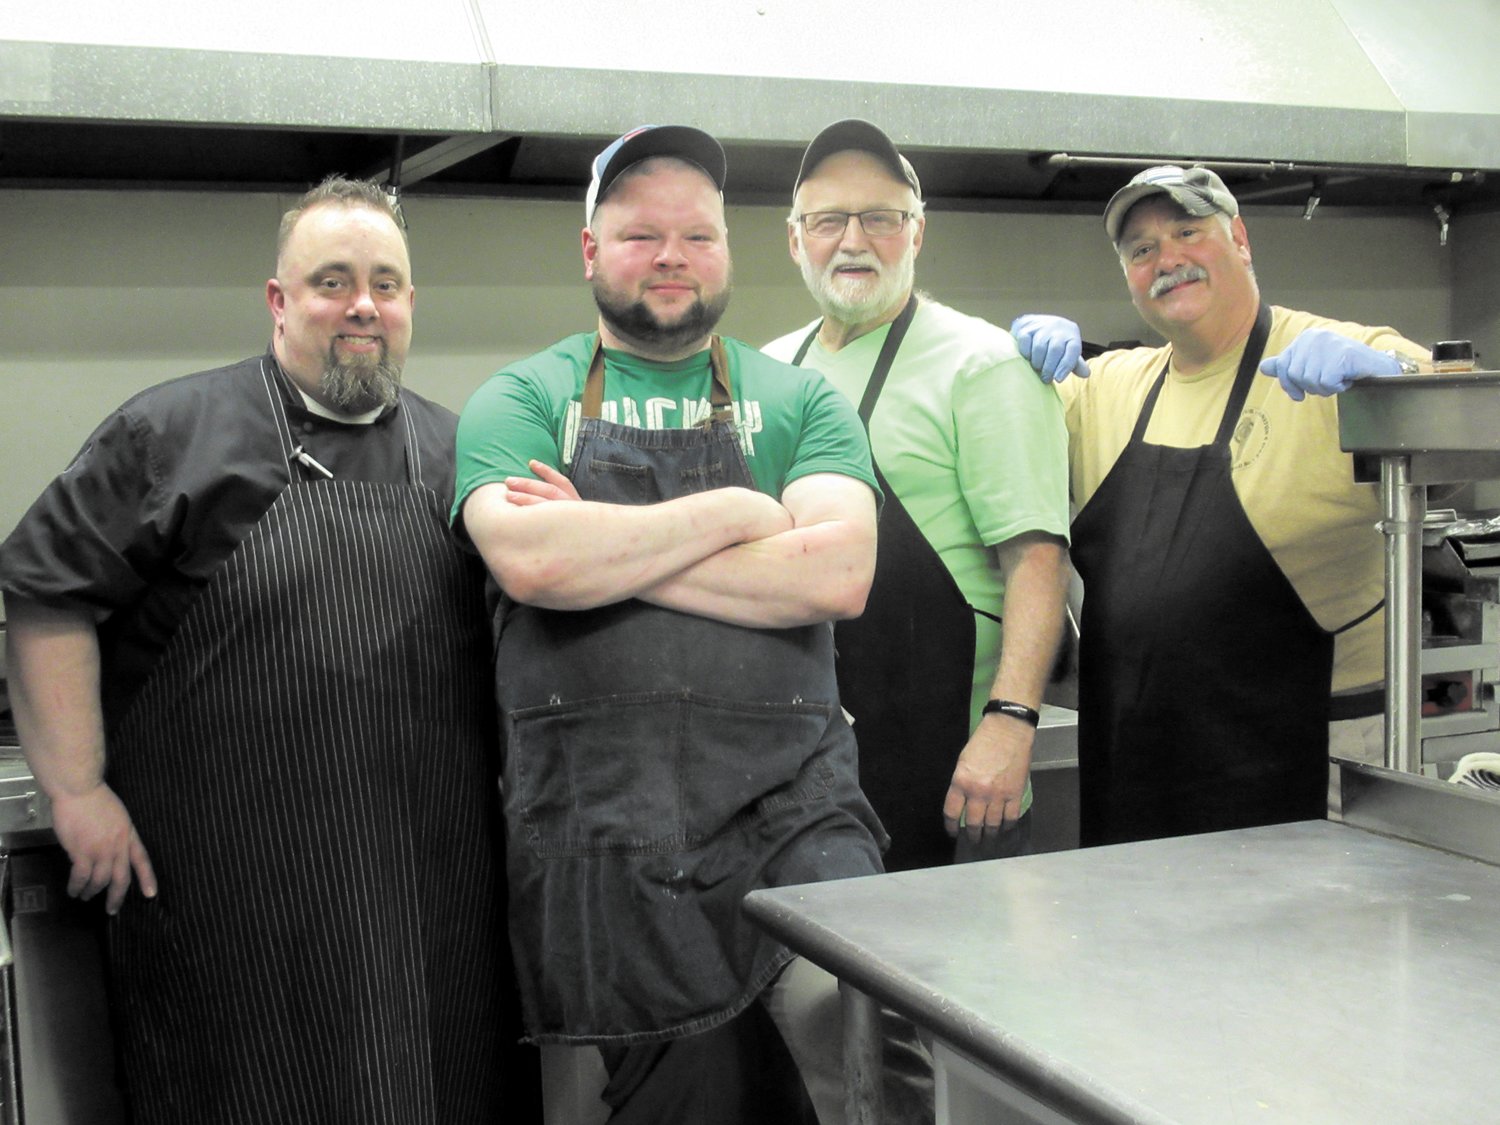 CHEF’S CORNER: Rob DeRemr, Brian Ashness, Bob Hartington and Eric Lopes prepared and cooked what people called “the best St. Patrick’s Dinner we’ve ever had” (here at the Tri-City Elks Lodge last Saturday night.”                                         Warwick Beacon photos by Pete Fontaine